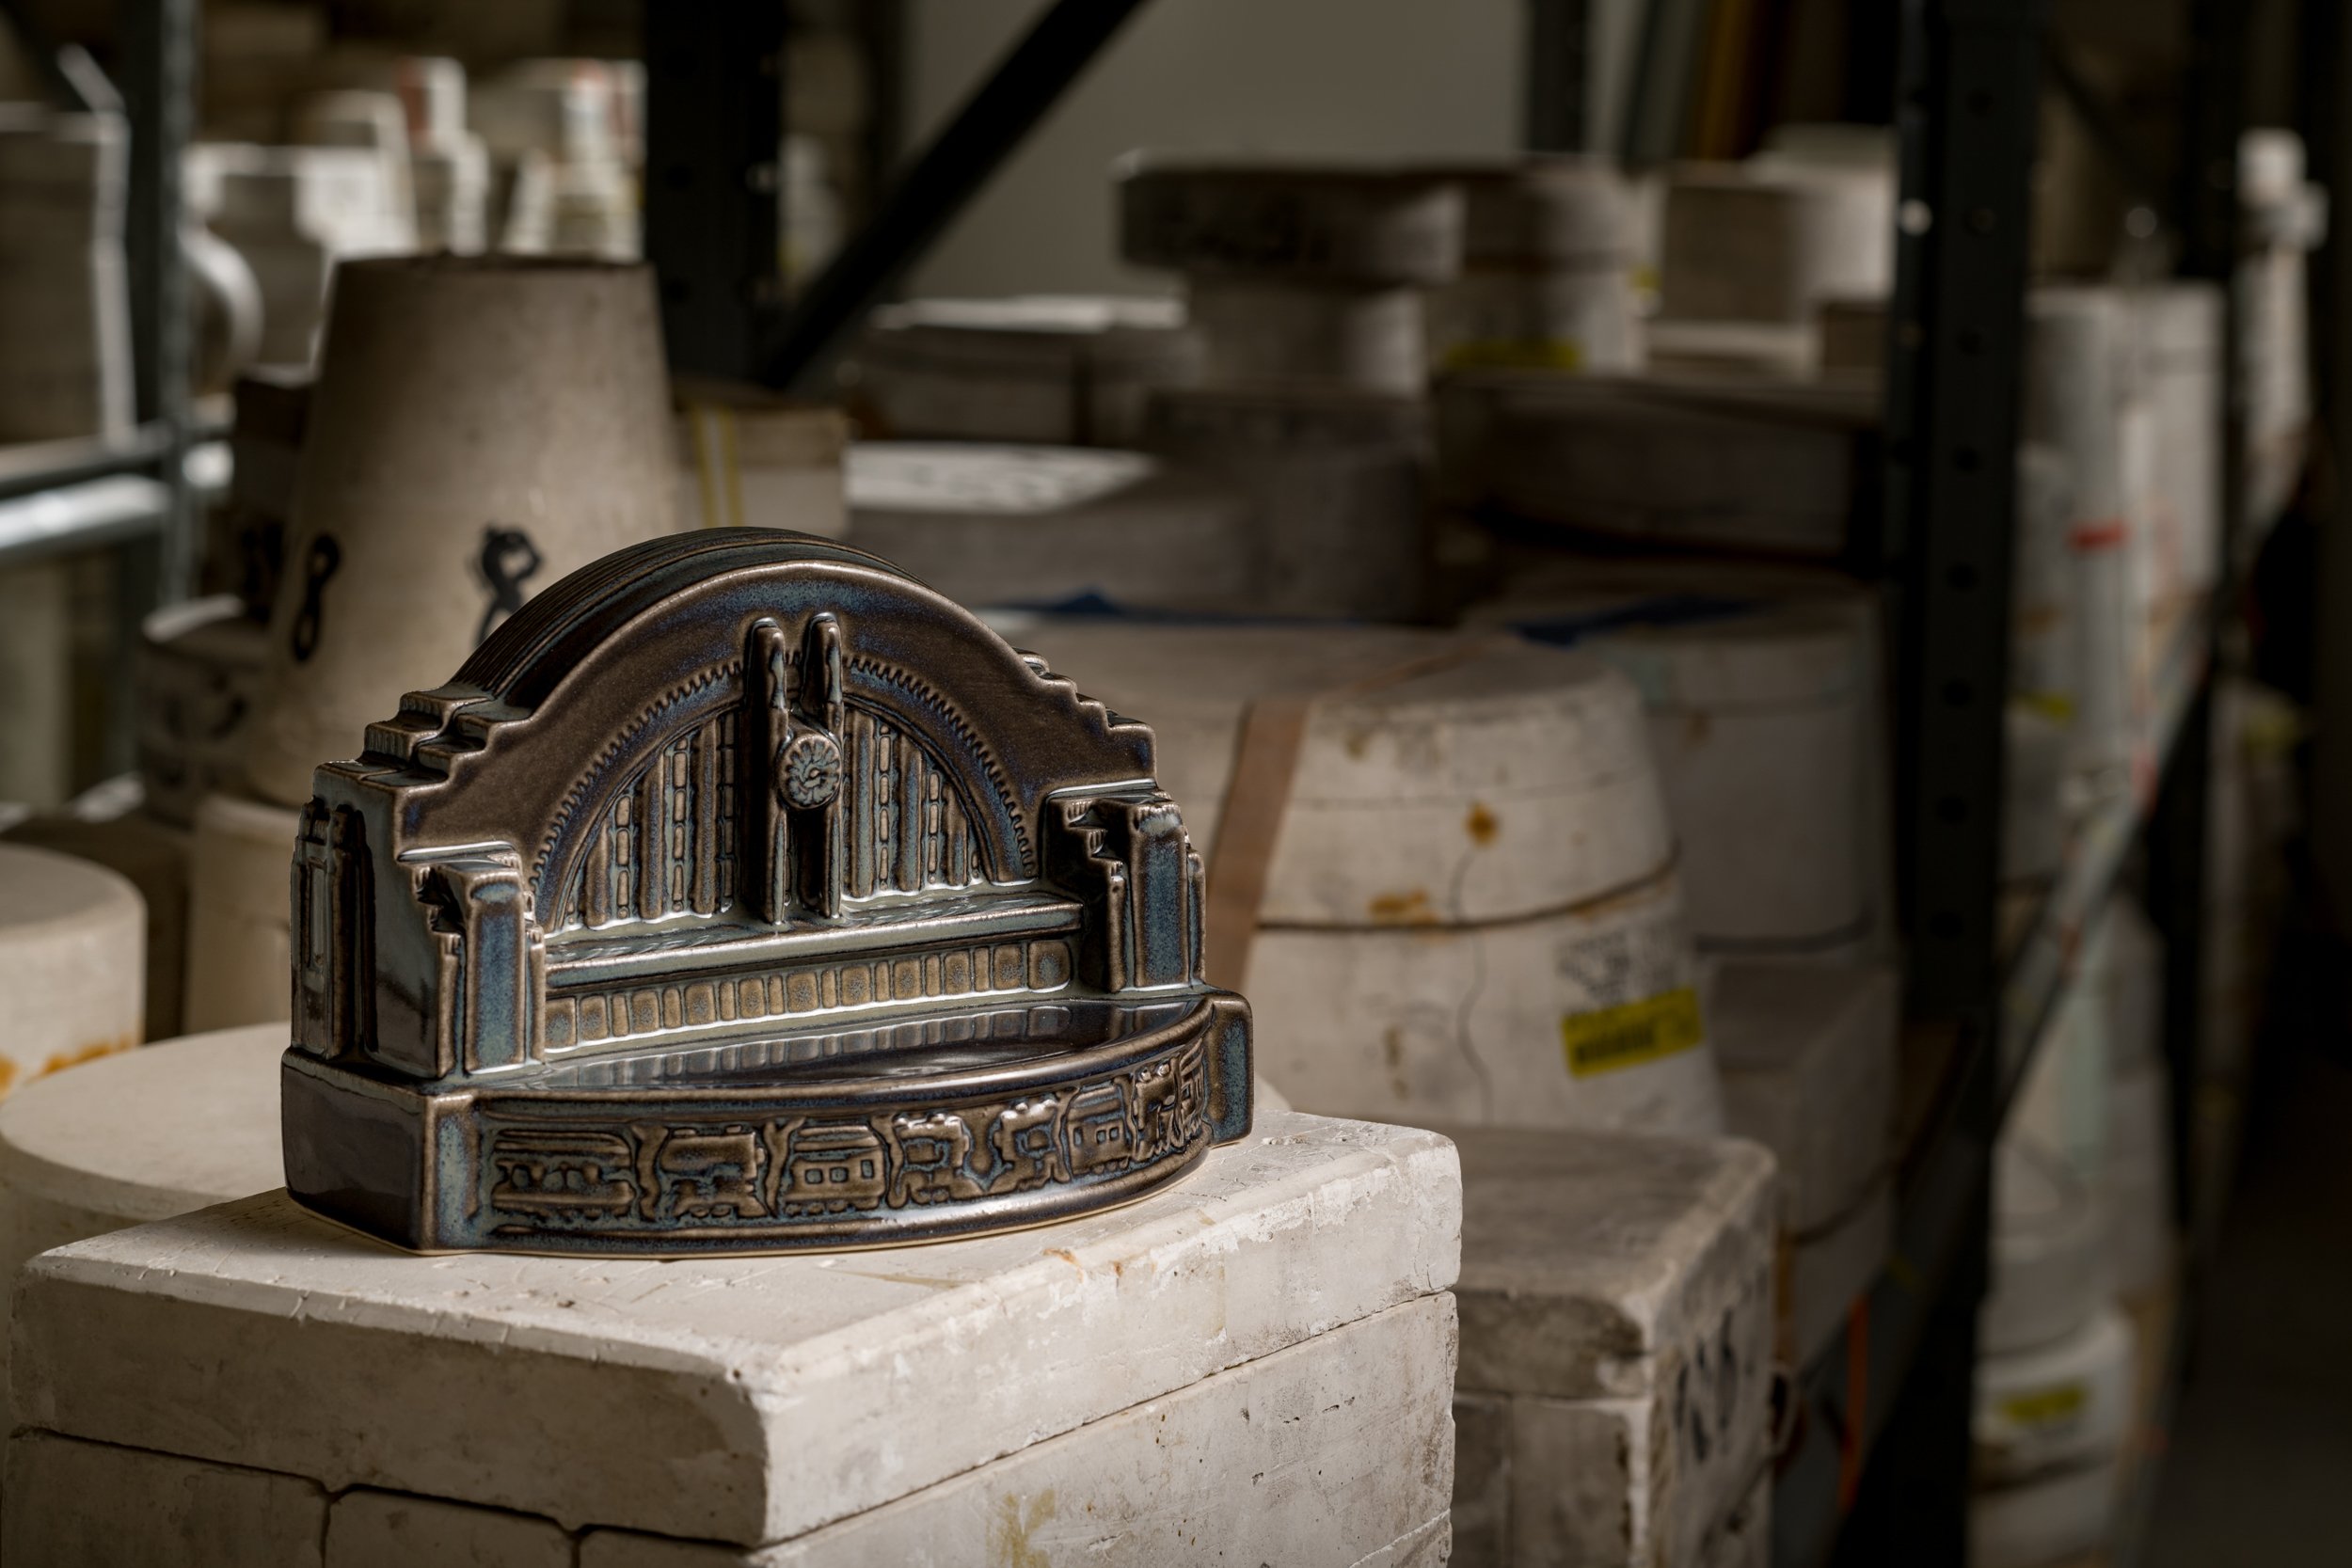 Union_Terminal_Bookend_in_Basement_Archive_Mar_2018_1_WEB.jpg